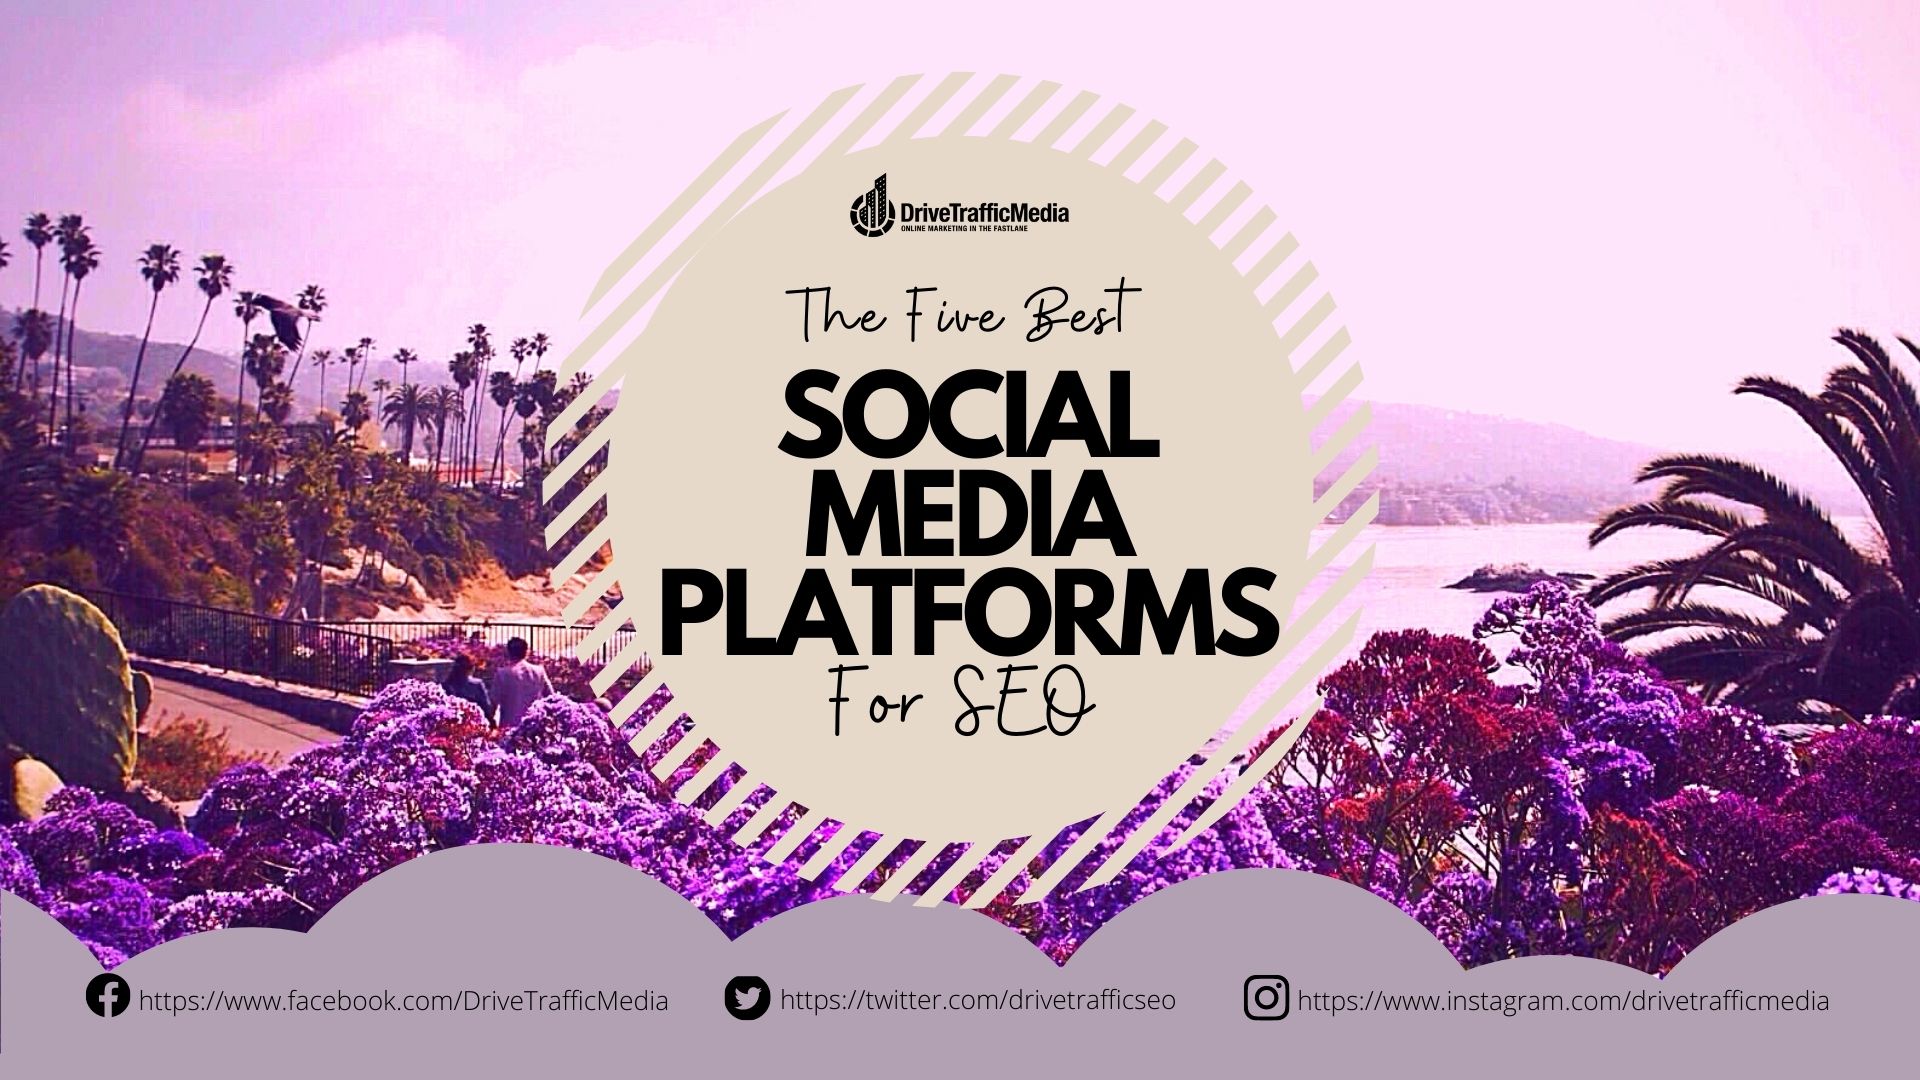 social-media-platforms-to-use-according-to-a-seo-orange-county-expert